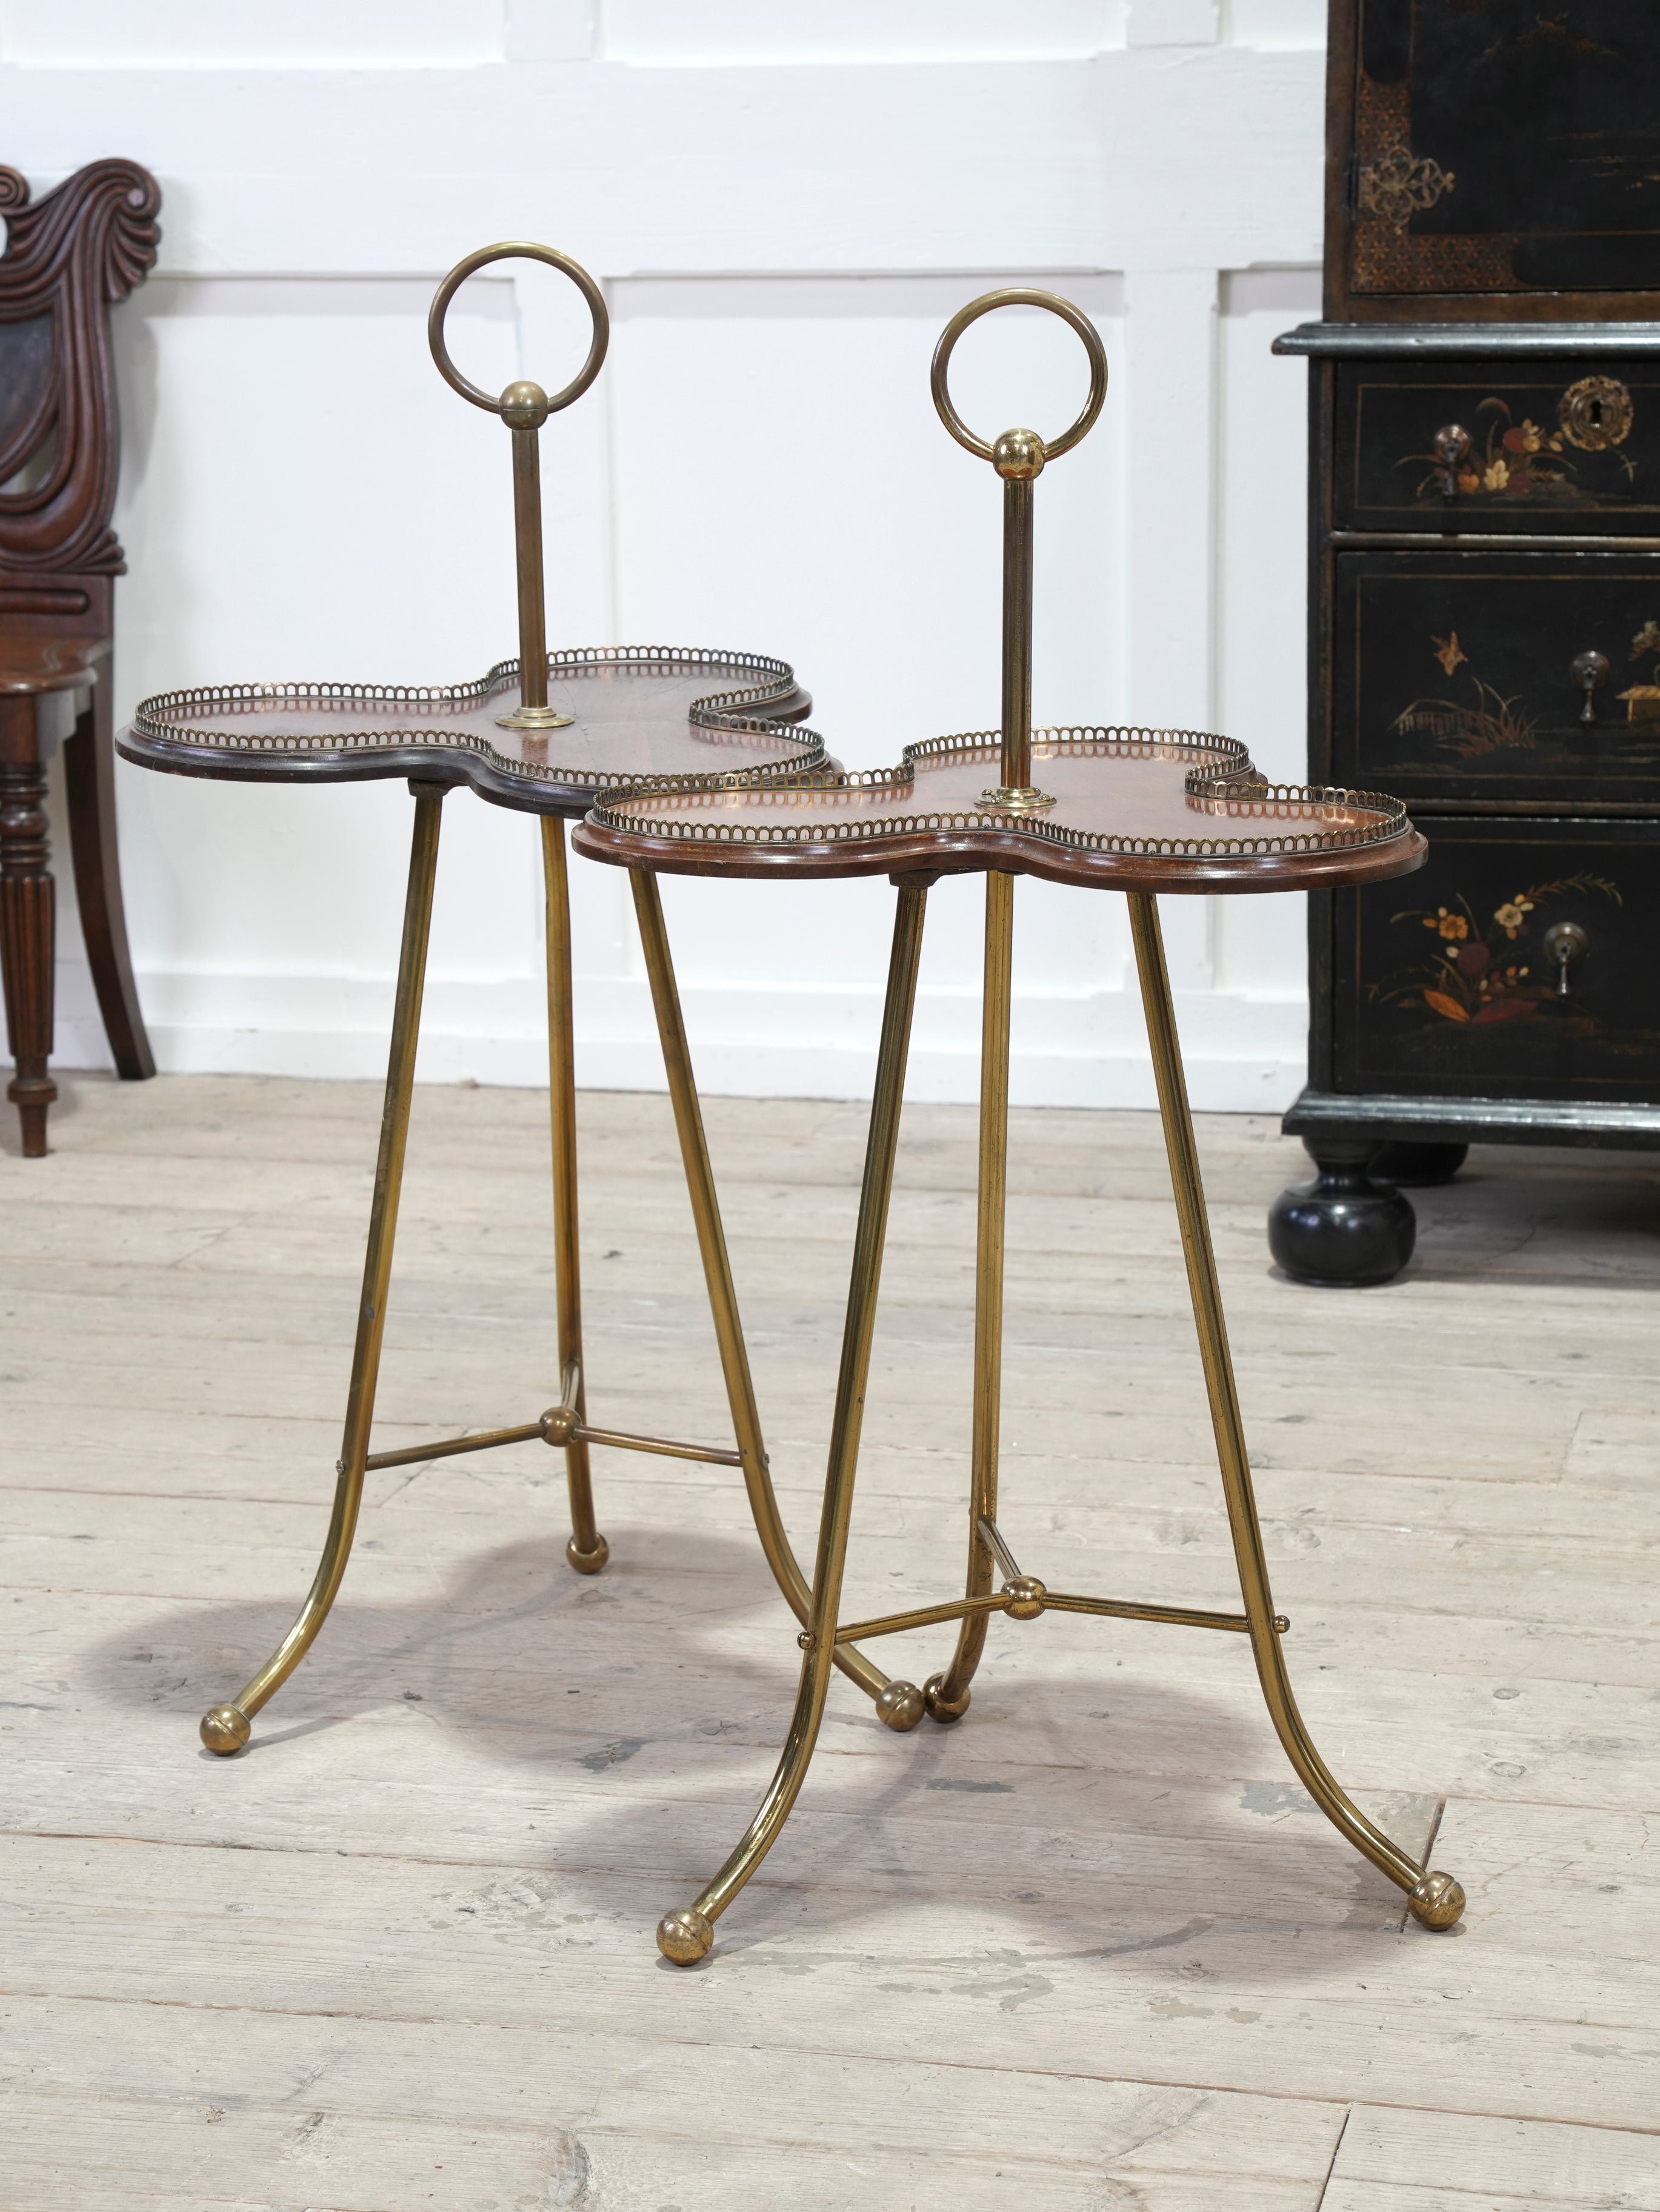 A Pair of Occasional Tables by S.Hall & Sons